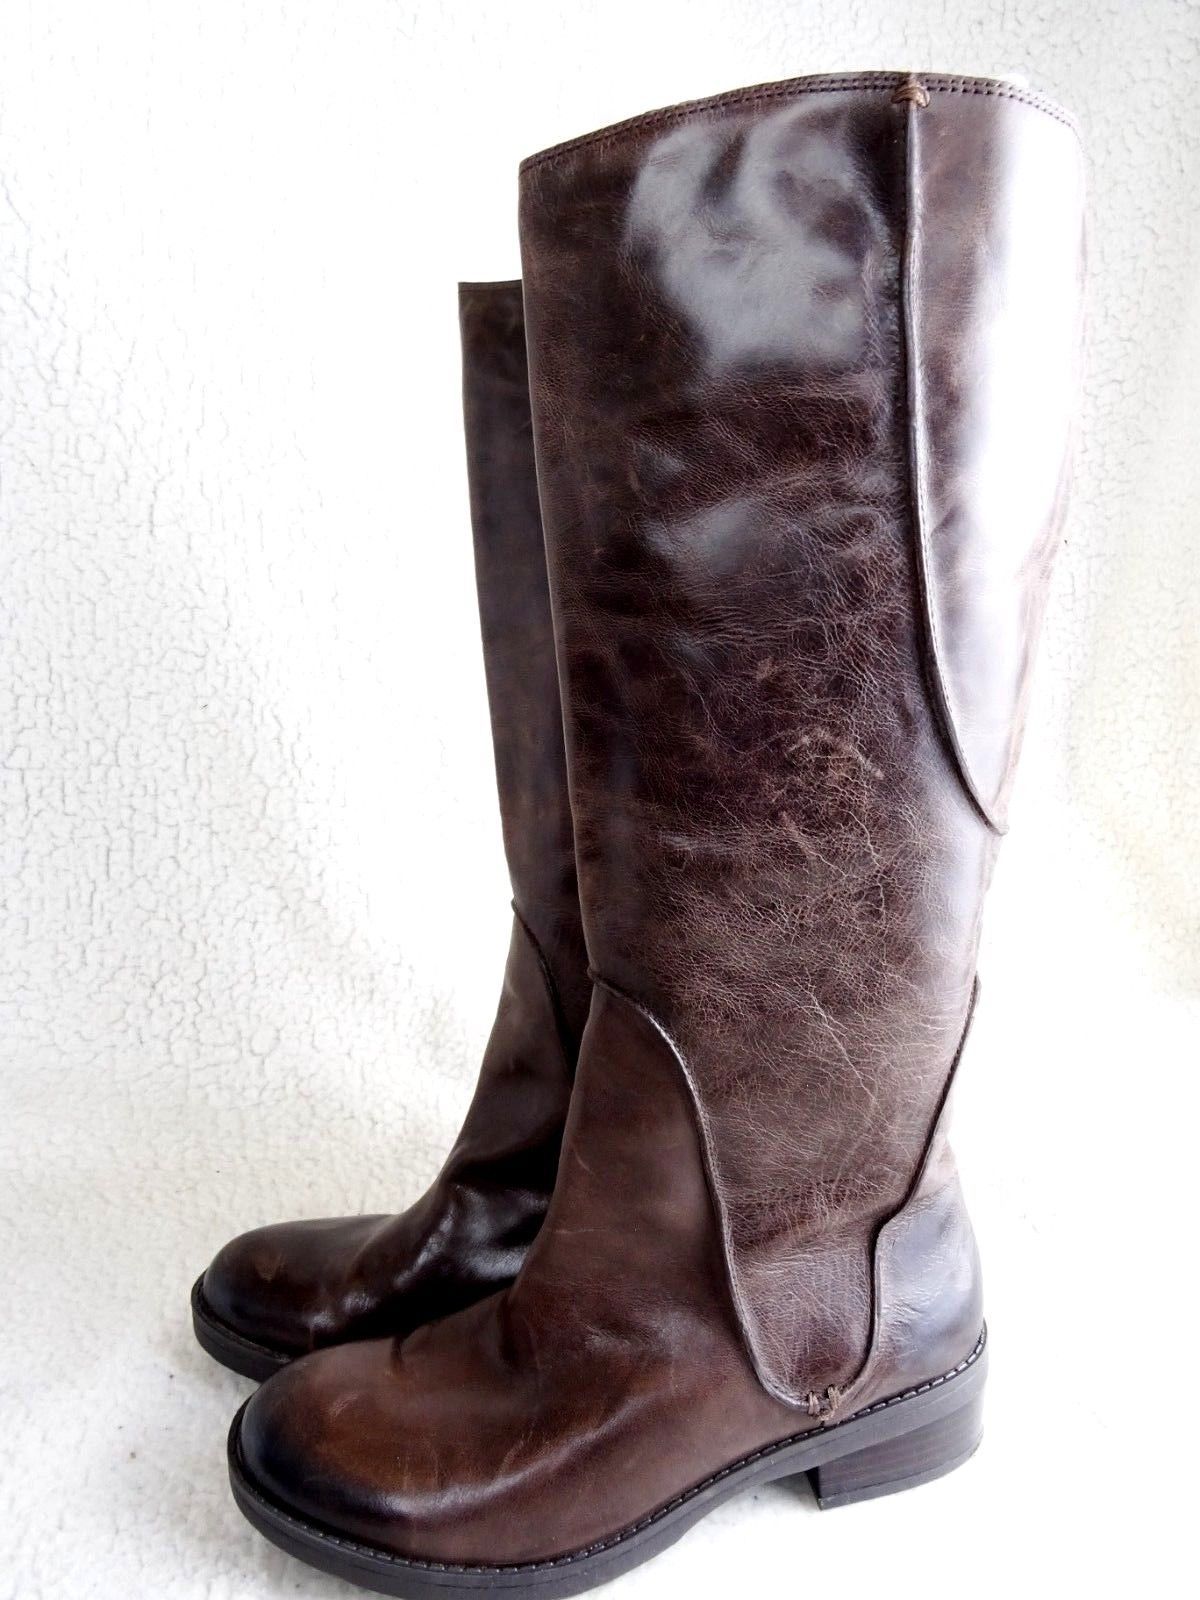 jessica simpson hilrie boots